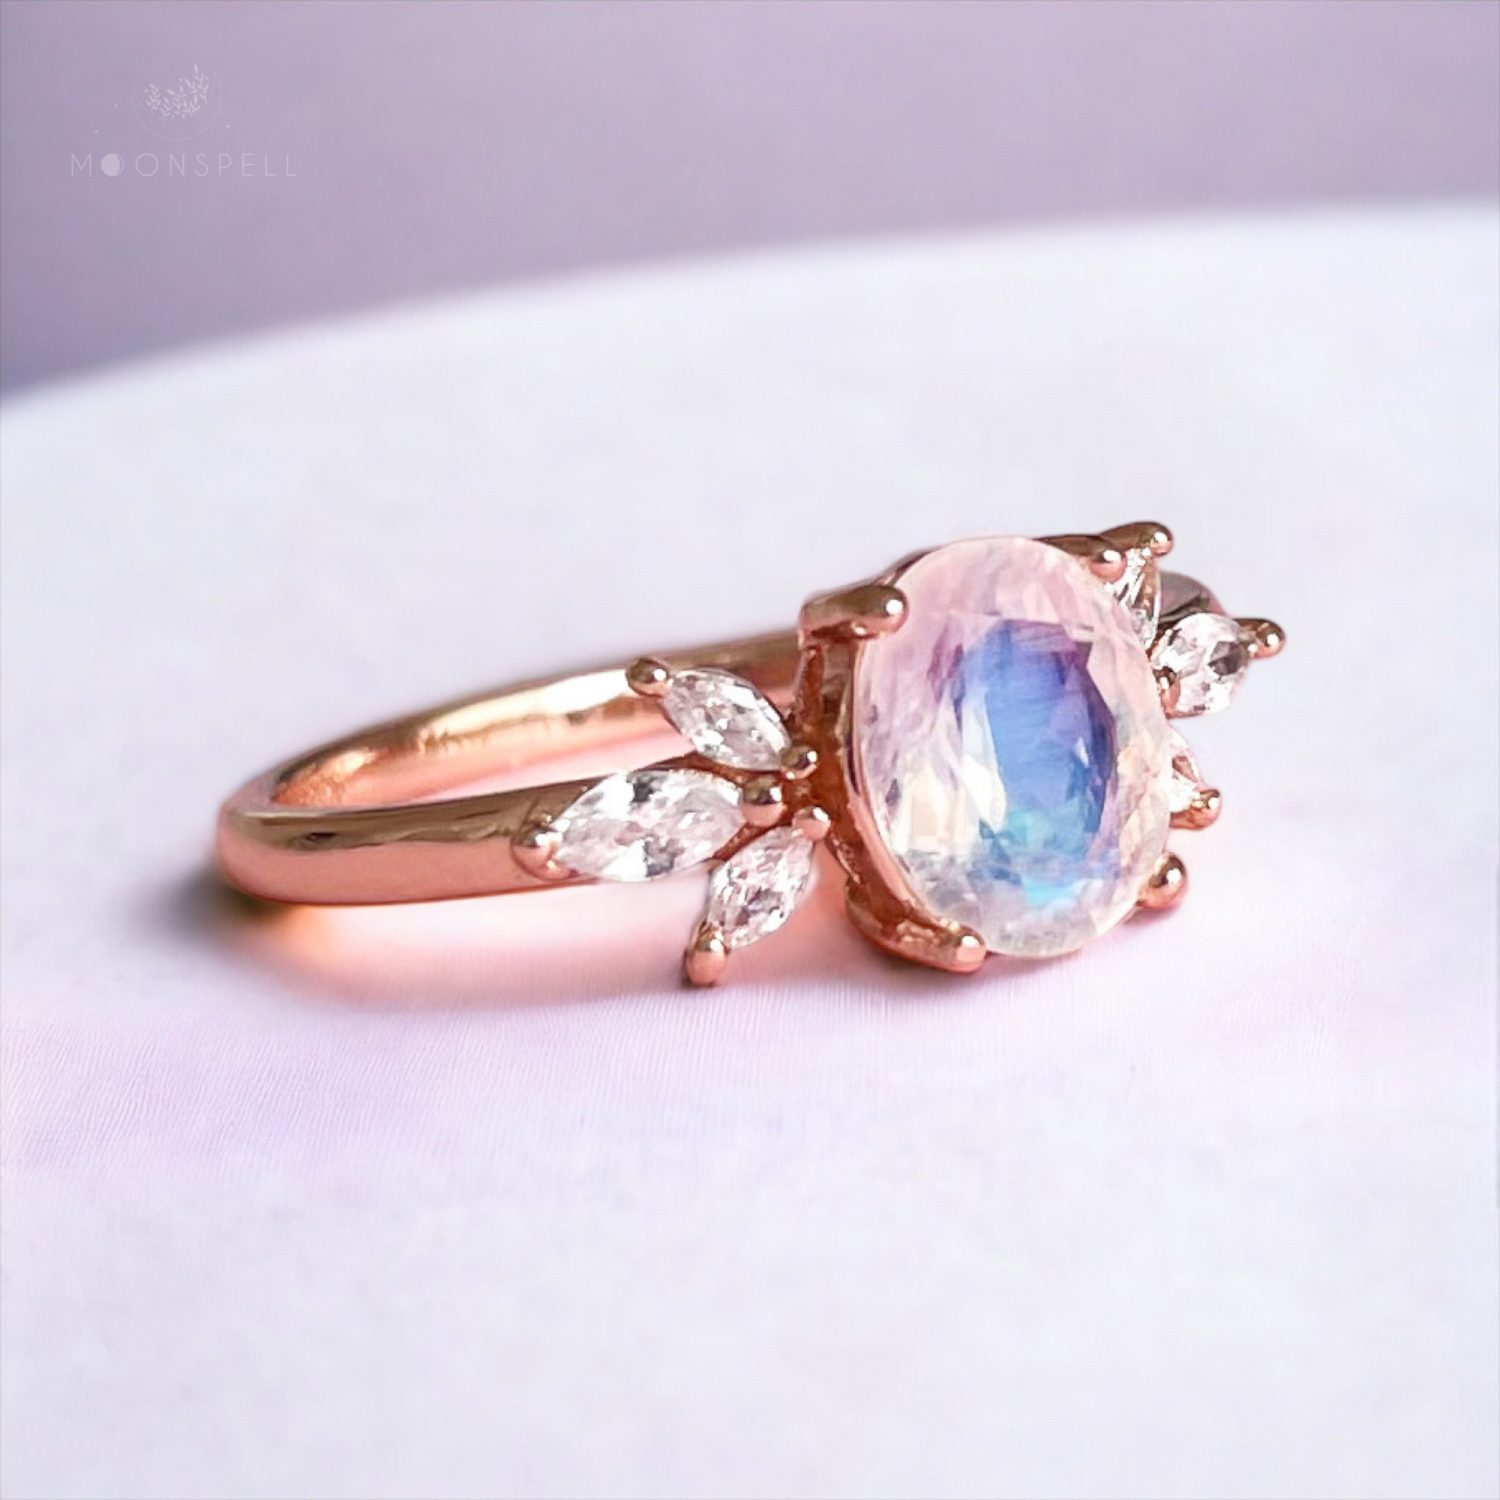 moonstone ring oval floral fine jewelry sterling silver Loane rose gold rainbow elvish nature romantic elegant magical gorgeous